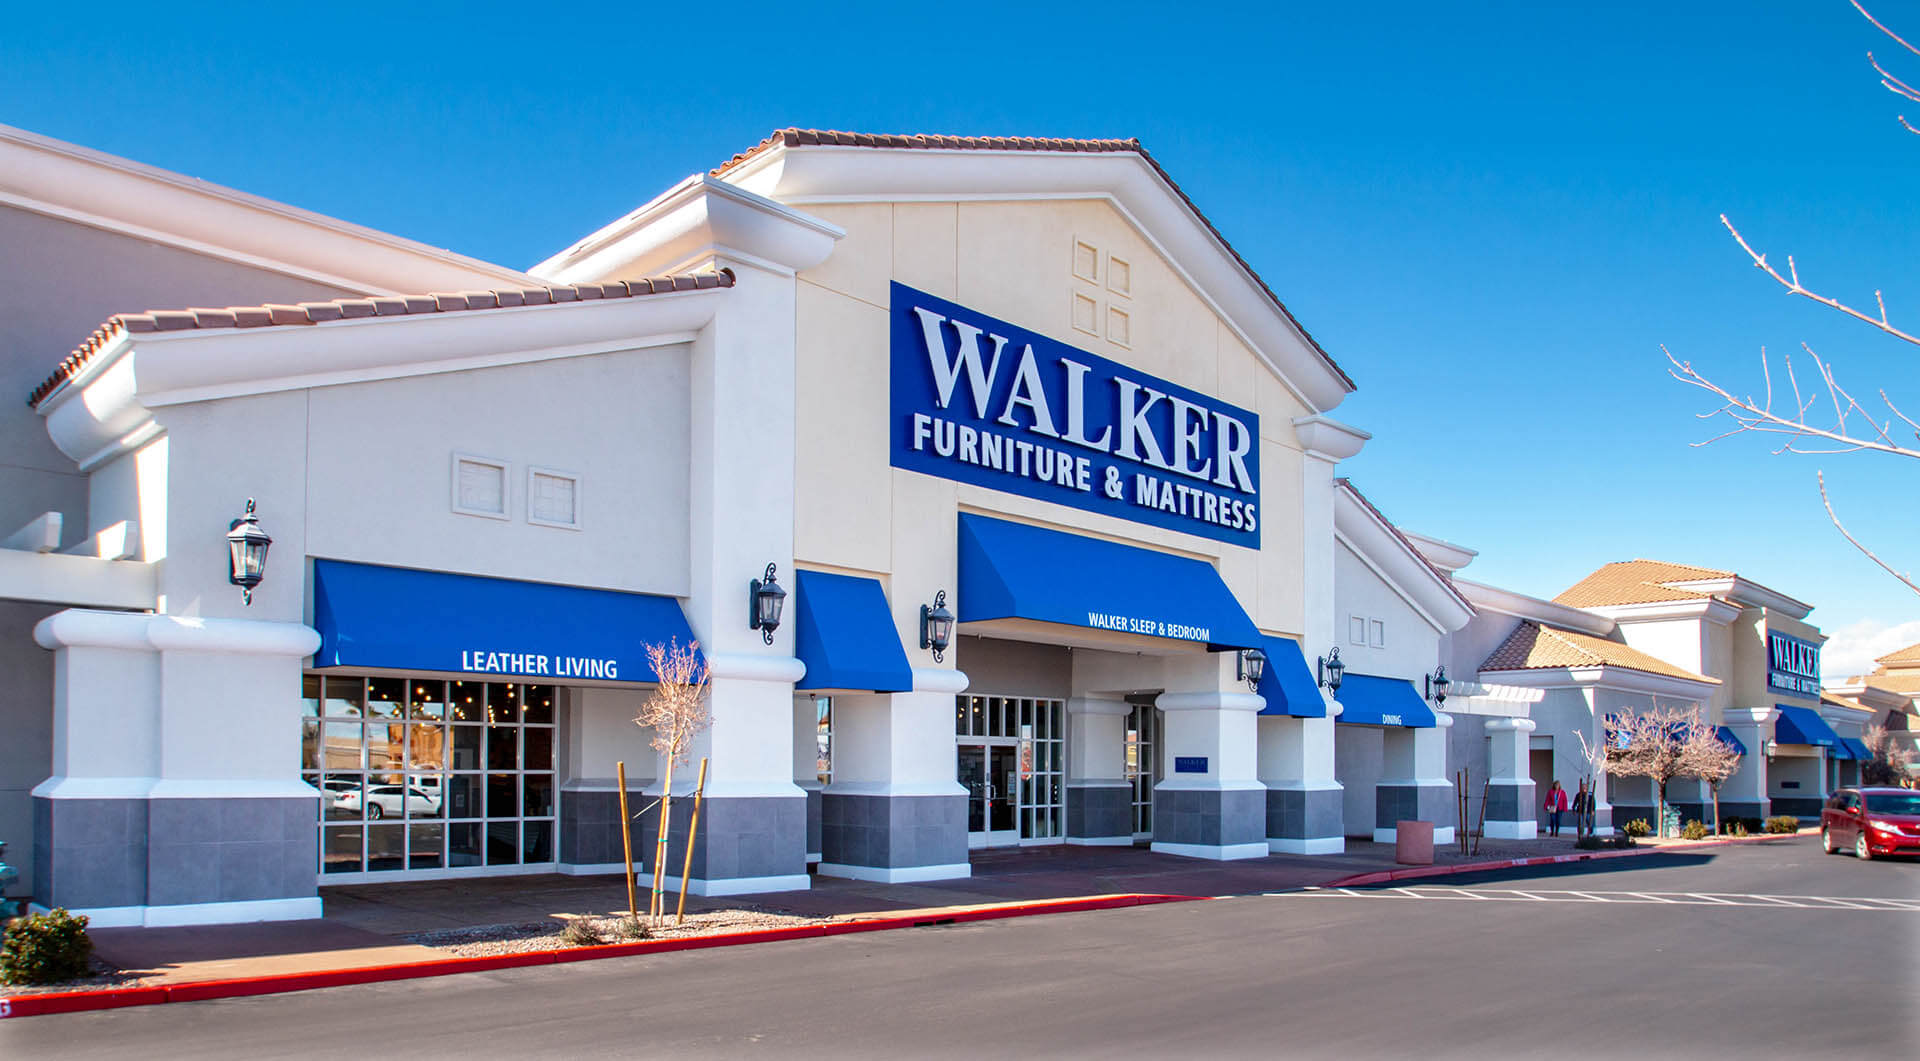 Walker Furniture Henderson Location - Awning Structures by Metro Awnings of Las Vegas, Nevada